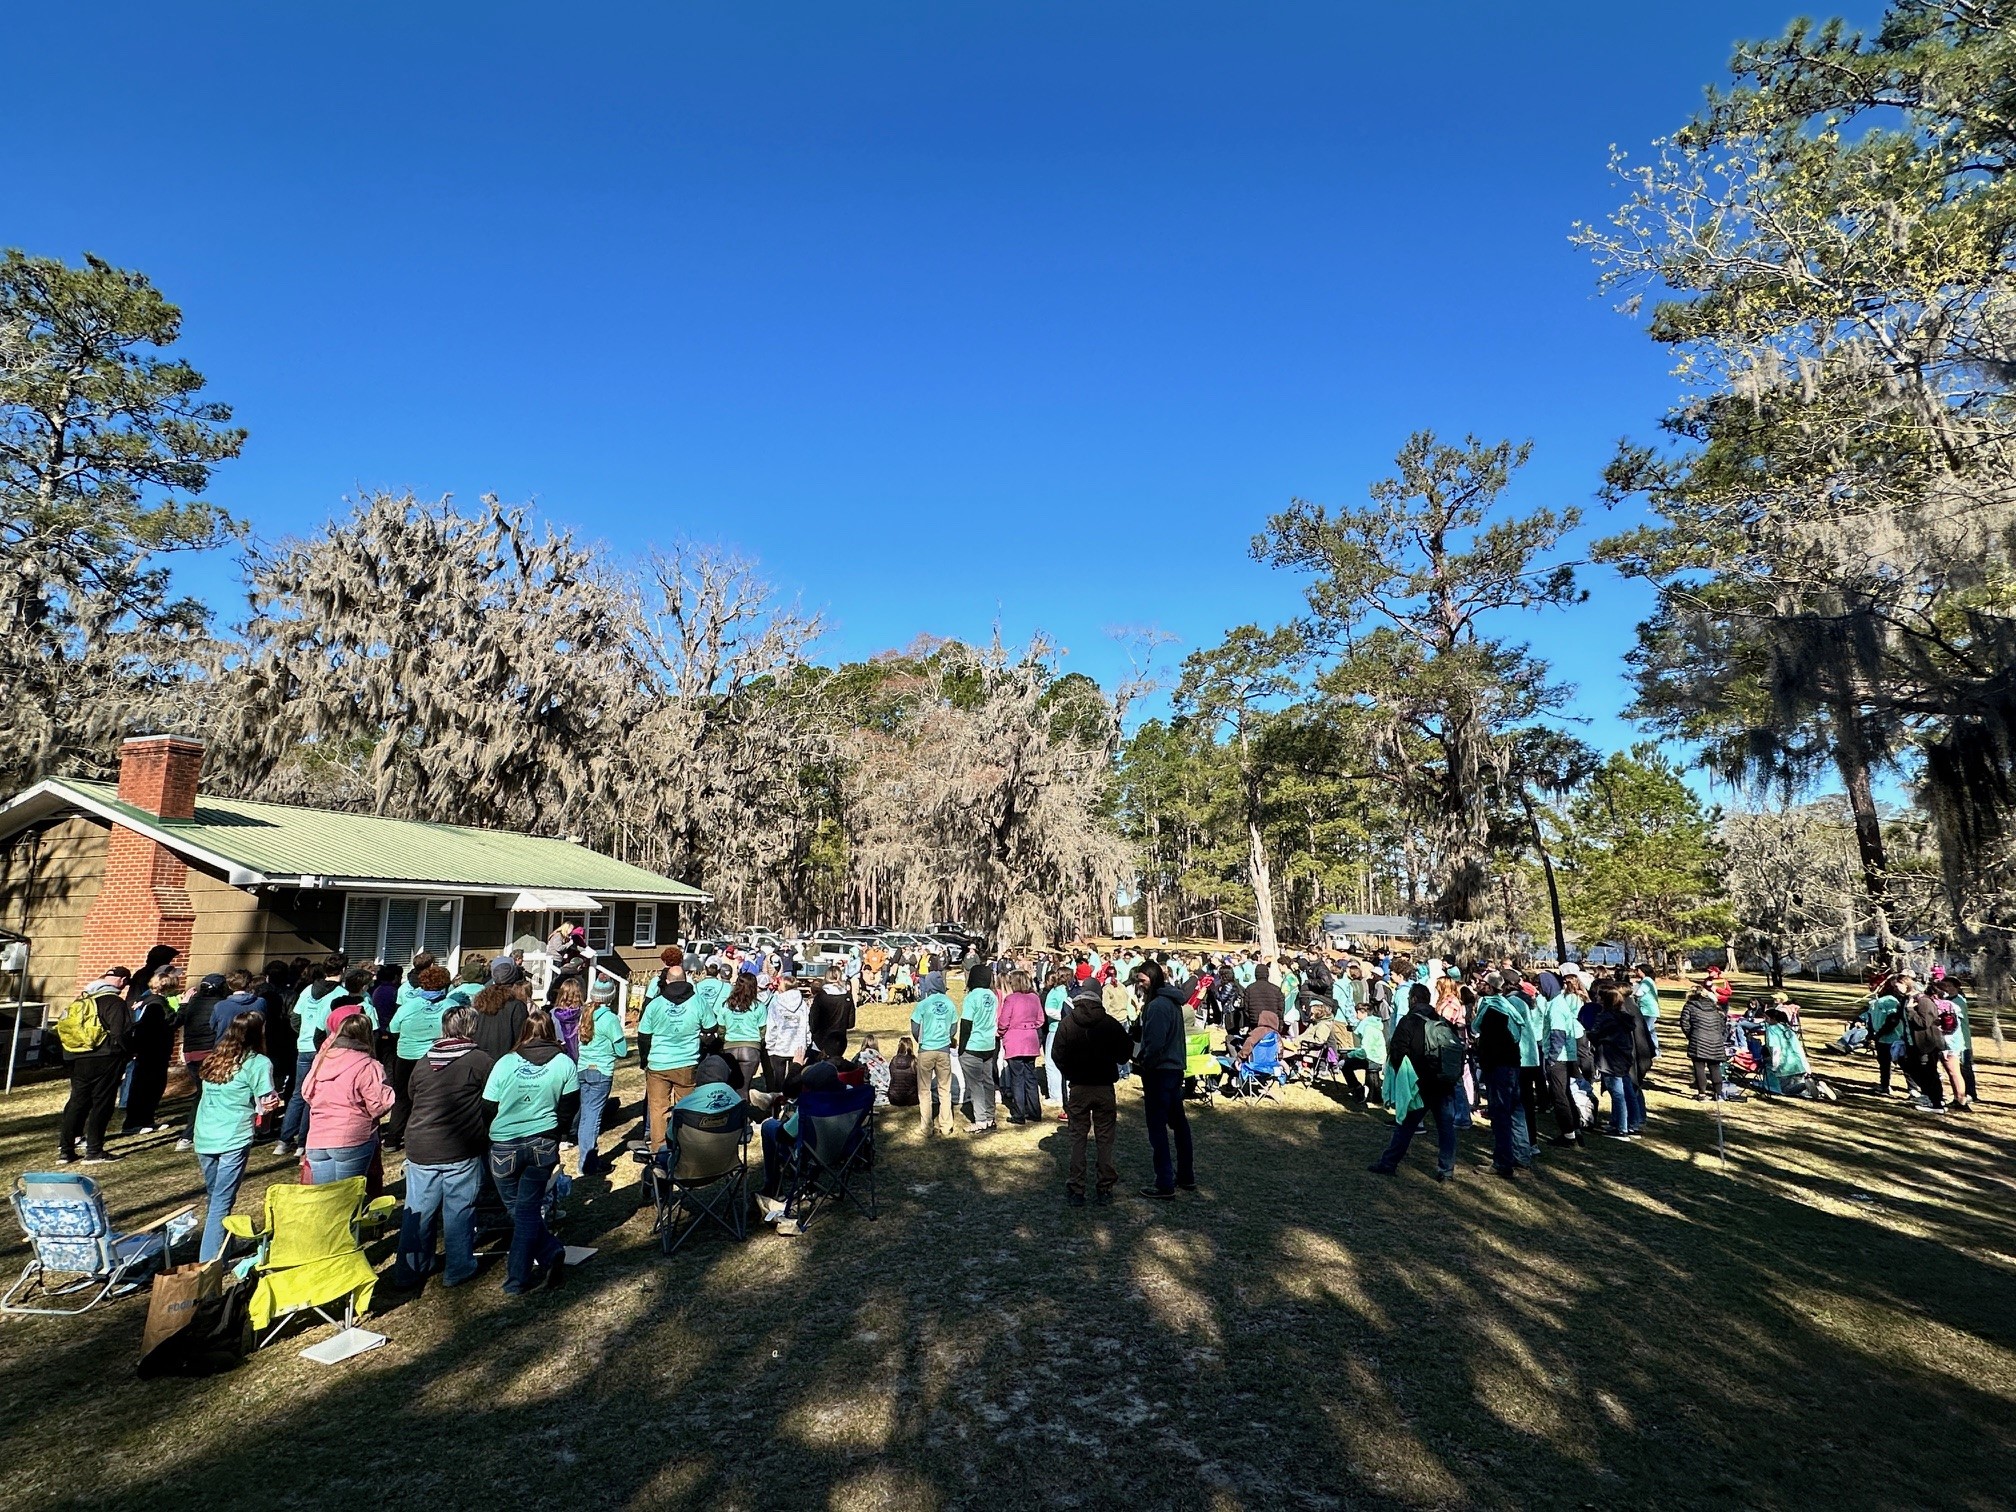 Image of the people who attended this year's Eivorothon, with numerous people wearing colorful shirts and trees surrounding our Cool Springs facility.